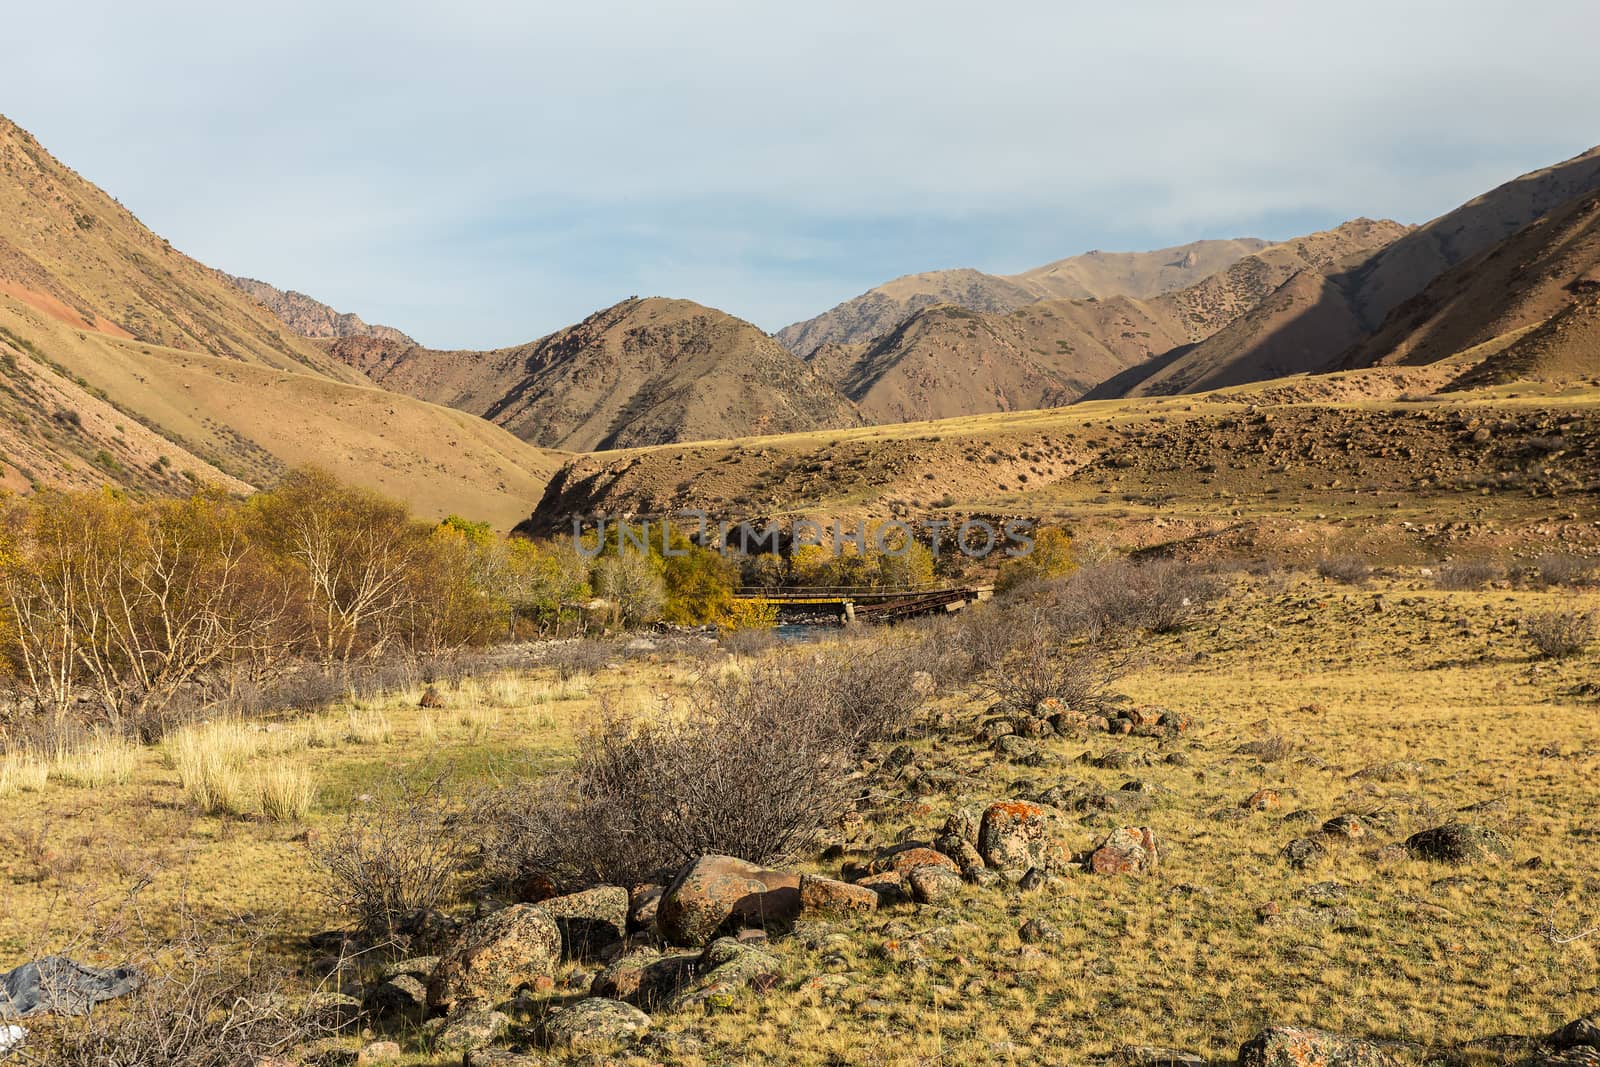 A gorge in the mountains with a river. Kokemeren river in Jumgal District of Naryn Province of Kyrgyzstan. Stones and bushes on the river bank.